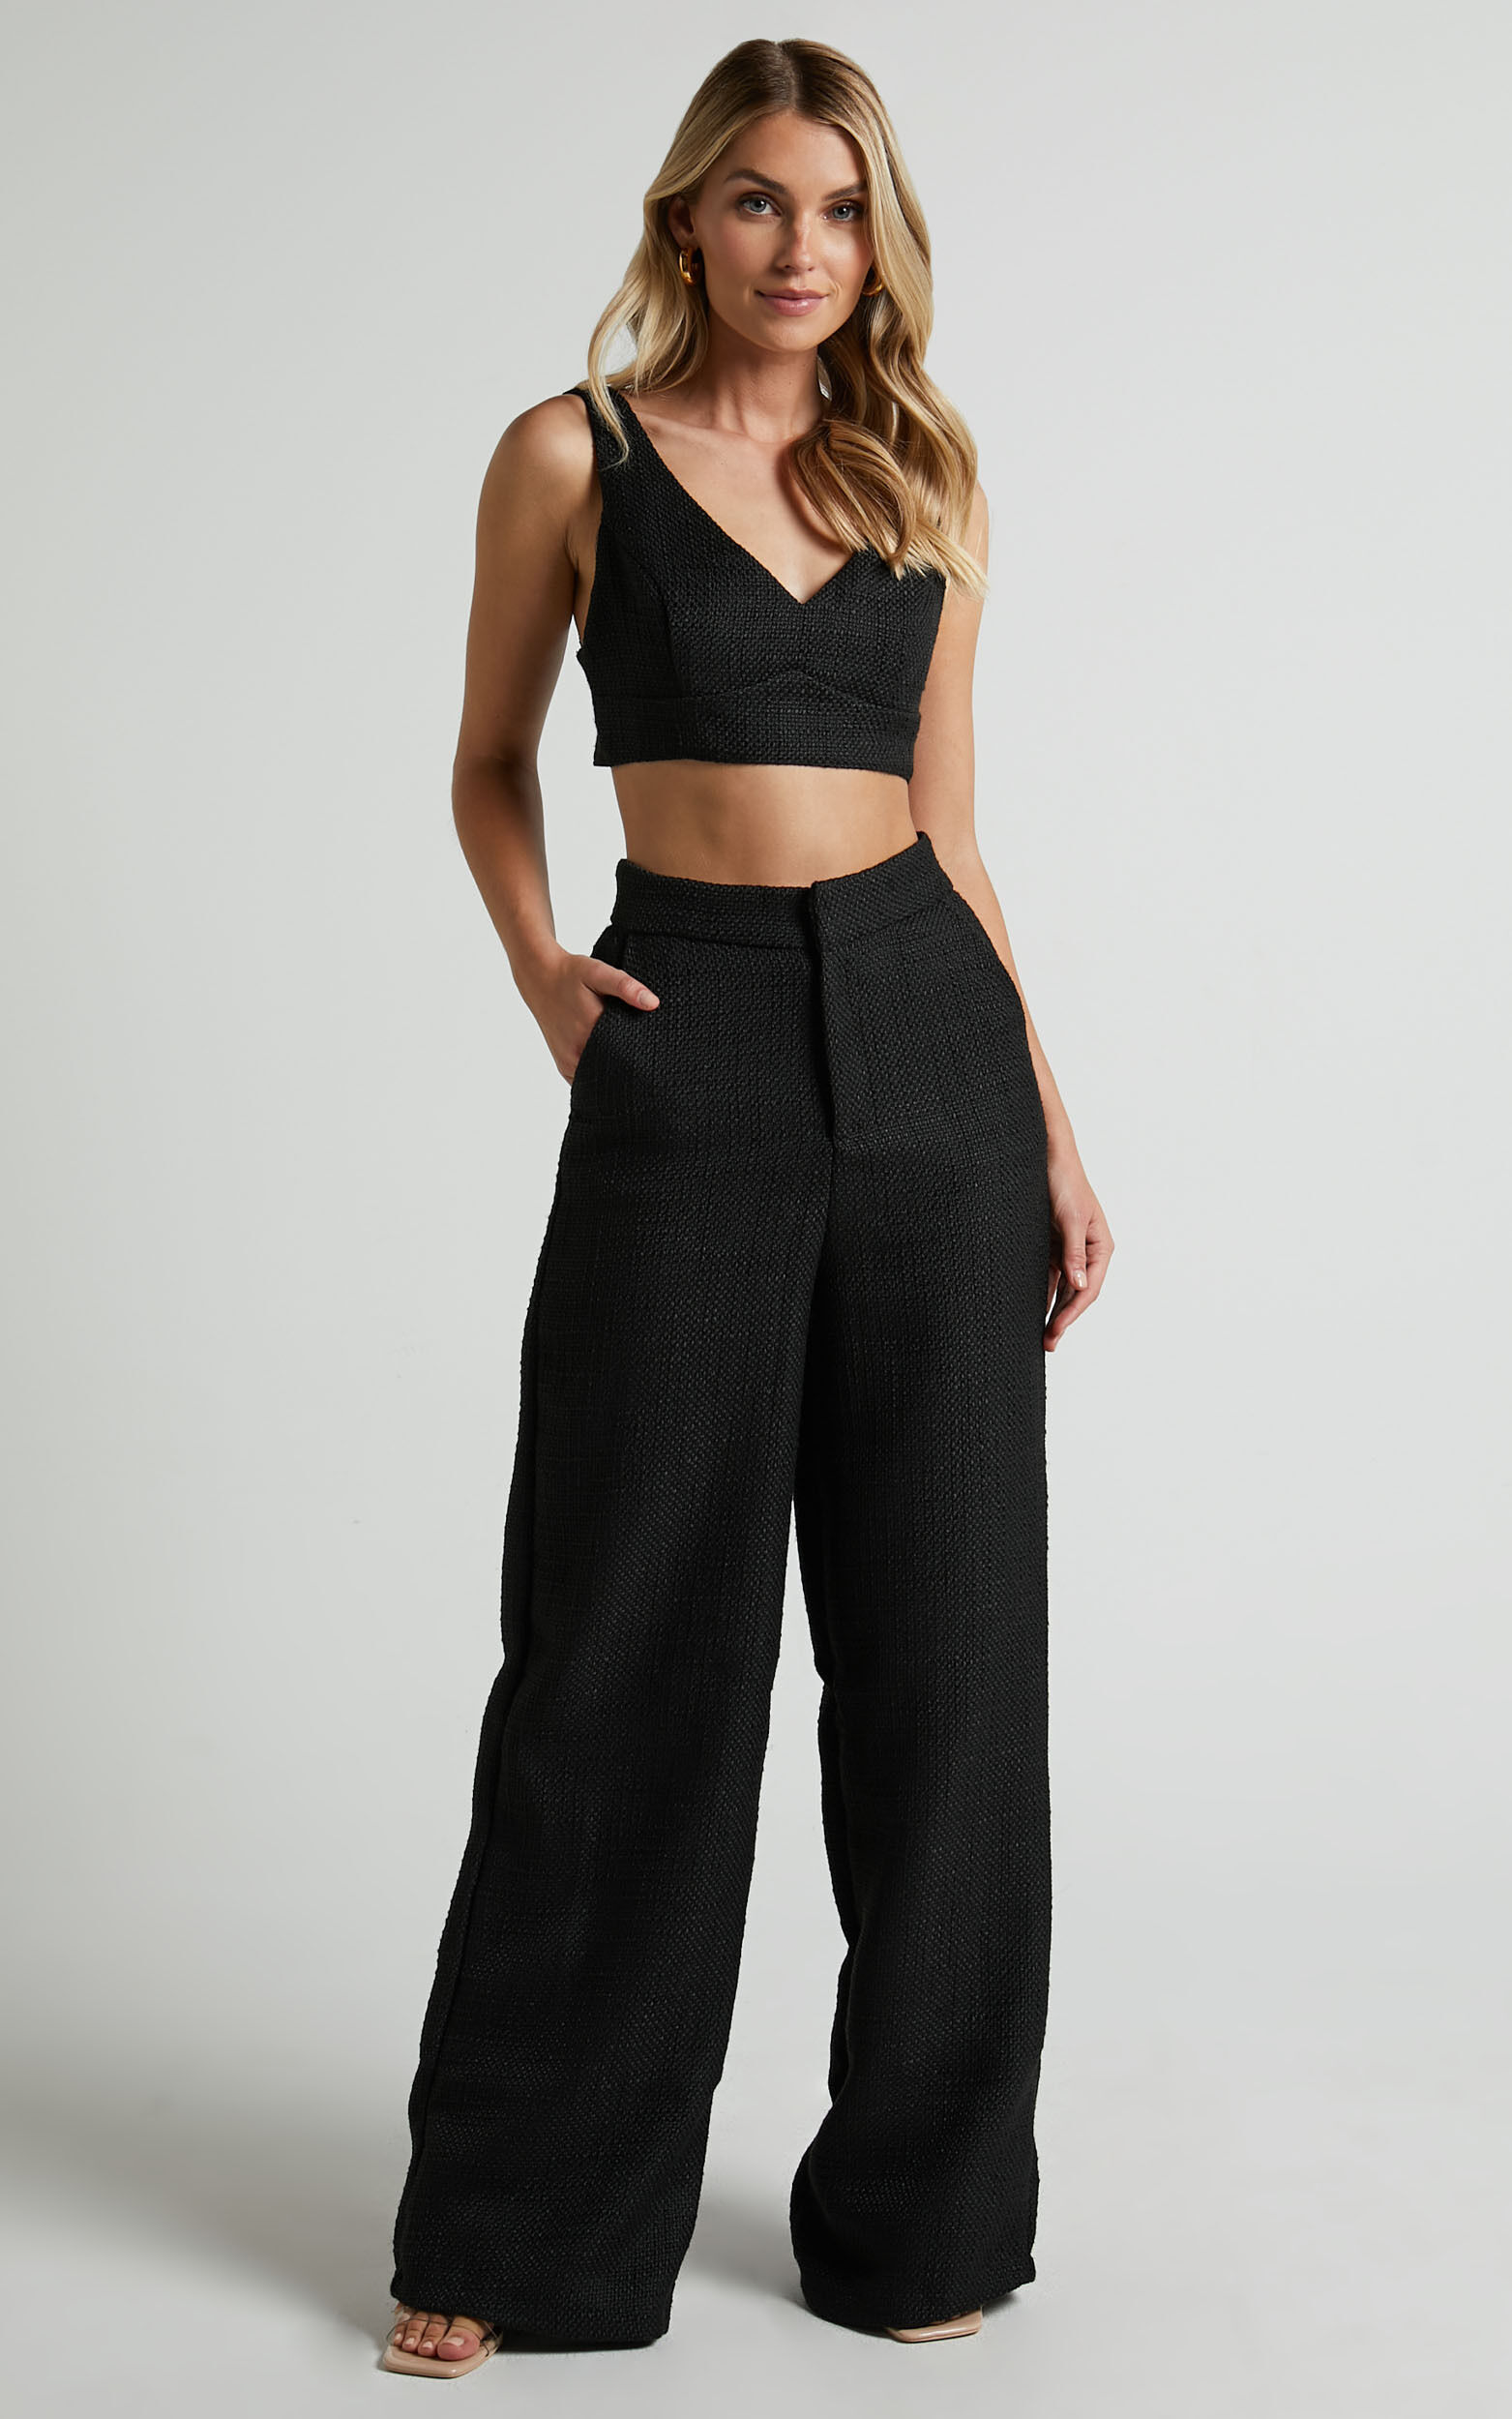 Adelaide Two Piece Set - Crop Top and Wide Leg Pants Set in Black - 06, BLK1